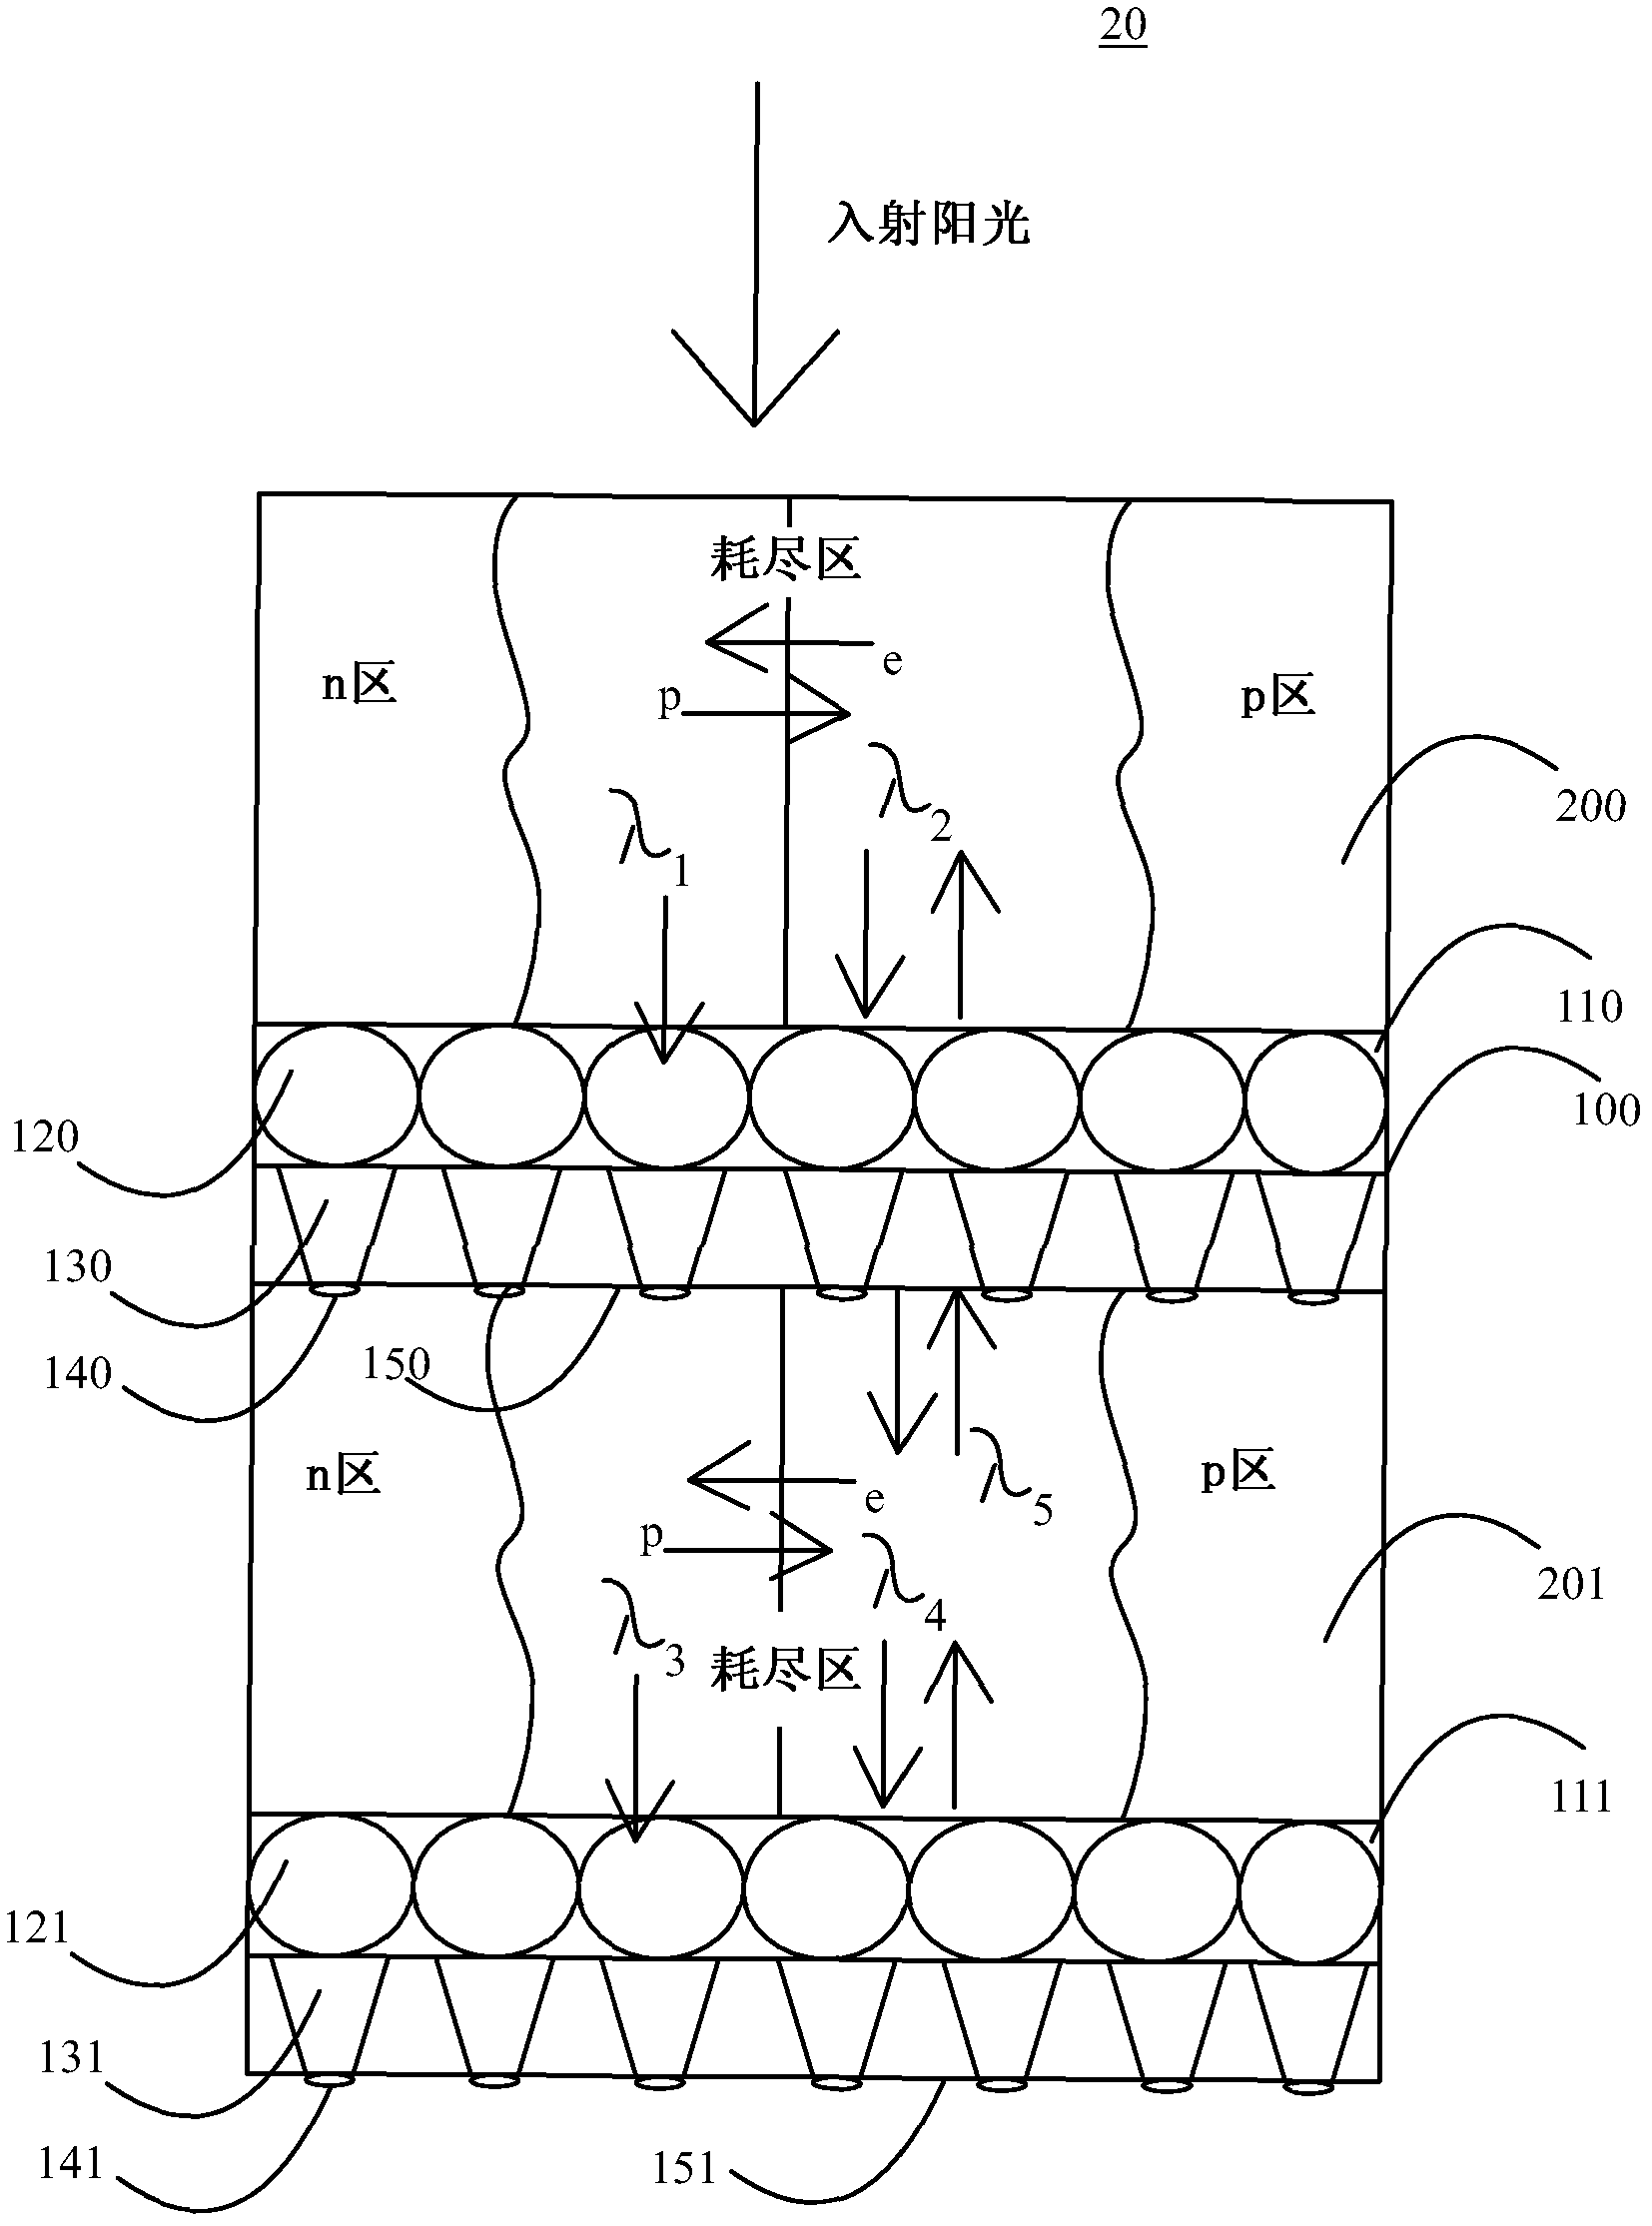 Method and means for a high power solar cell